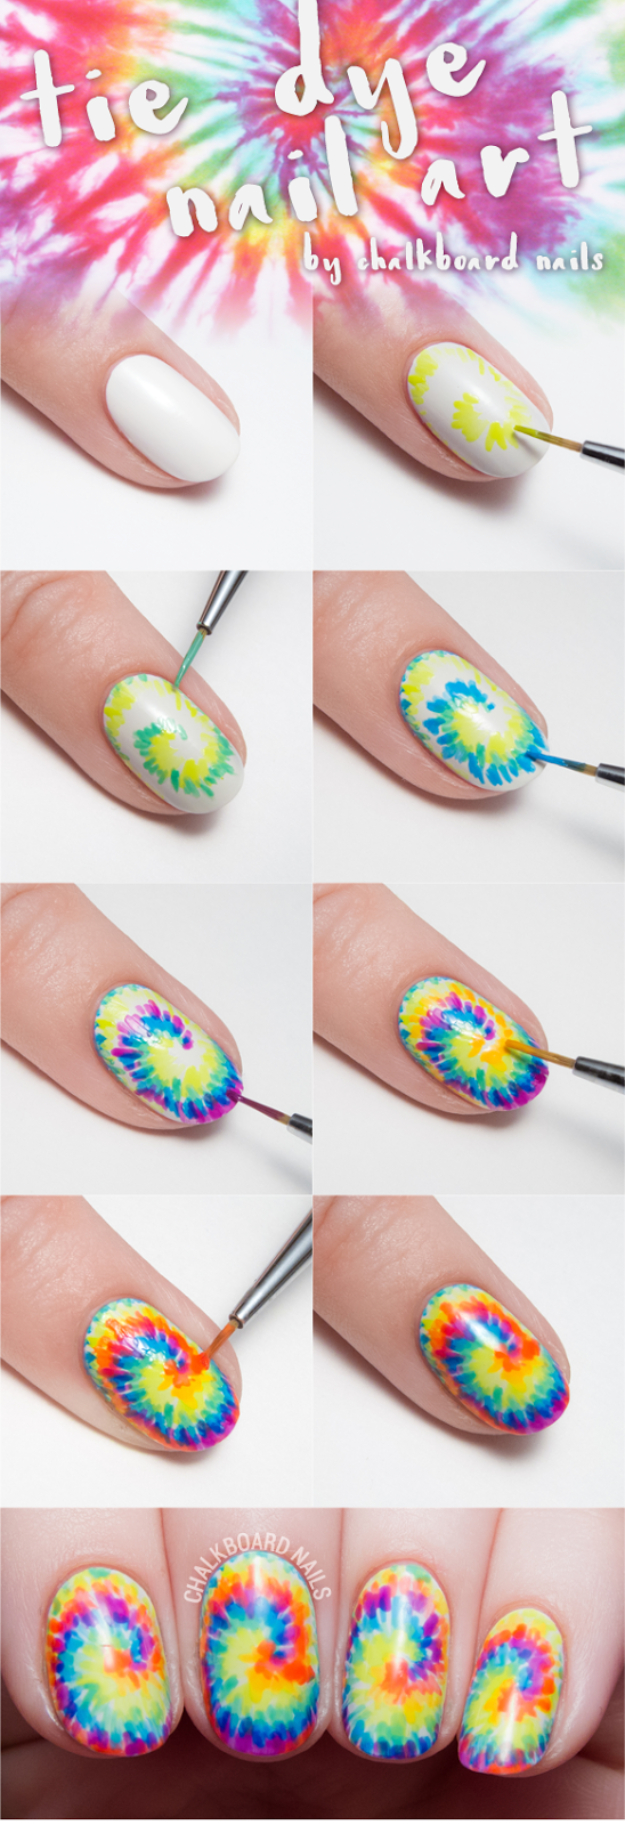 Awesome Nail Art Patterns And Ideas - Tie Dye Nail Art - Step by Step DIY Nail Design Tutorials for Simple Art, Tribal Prints, Best Black and White Manicures. Easy and Fun Colors, Shapes and Designs for Your Nails http://diyprojectsforteens.com/best-nail-art-patterns-tutorials